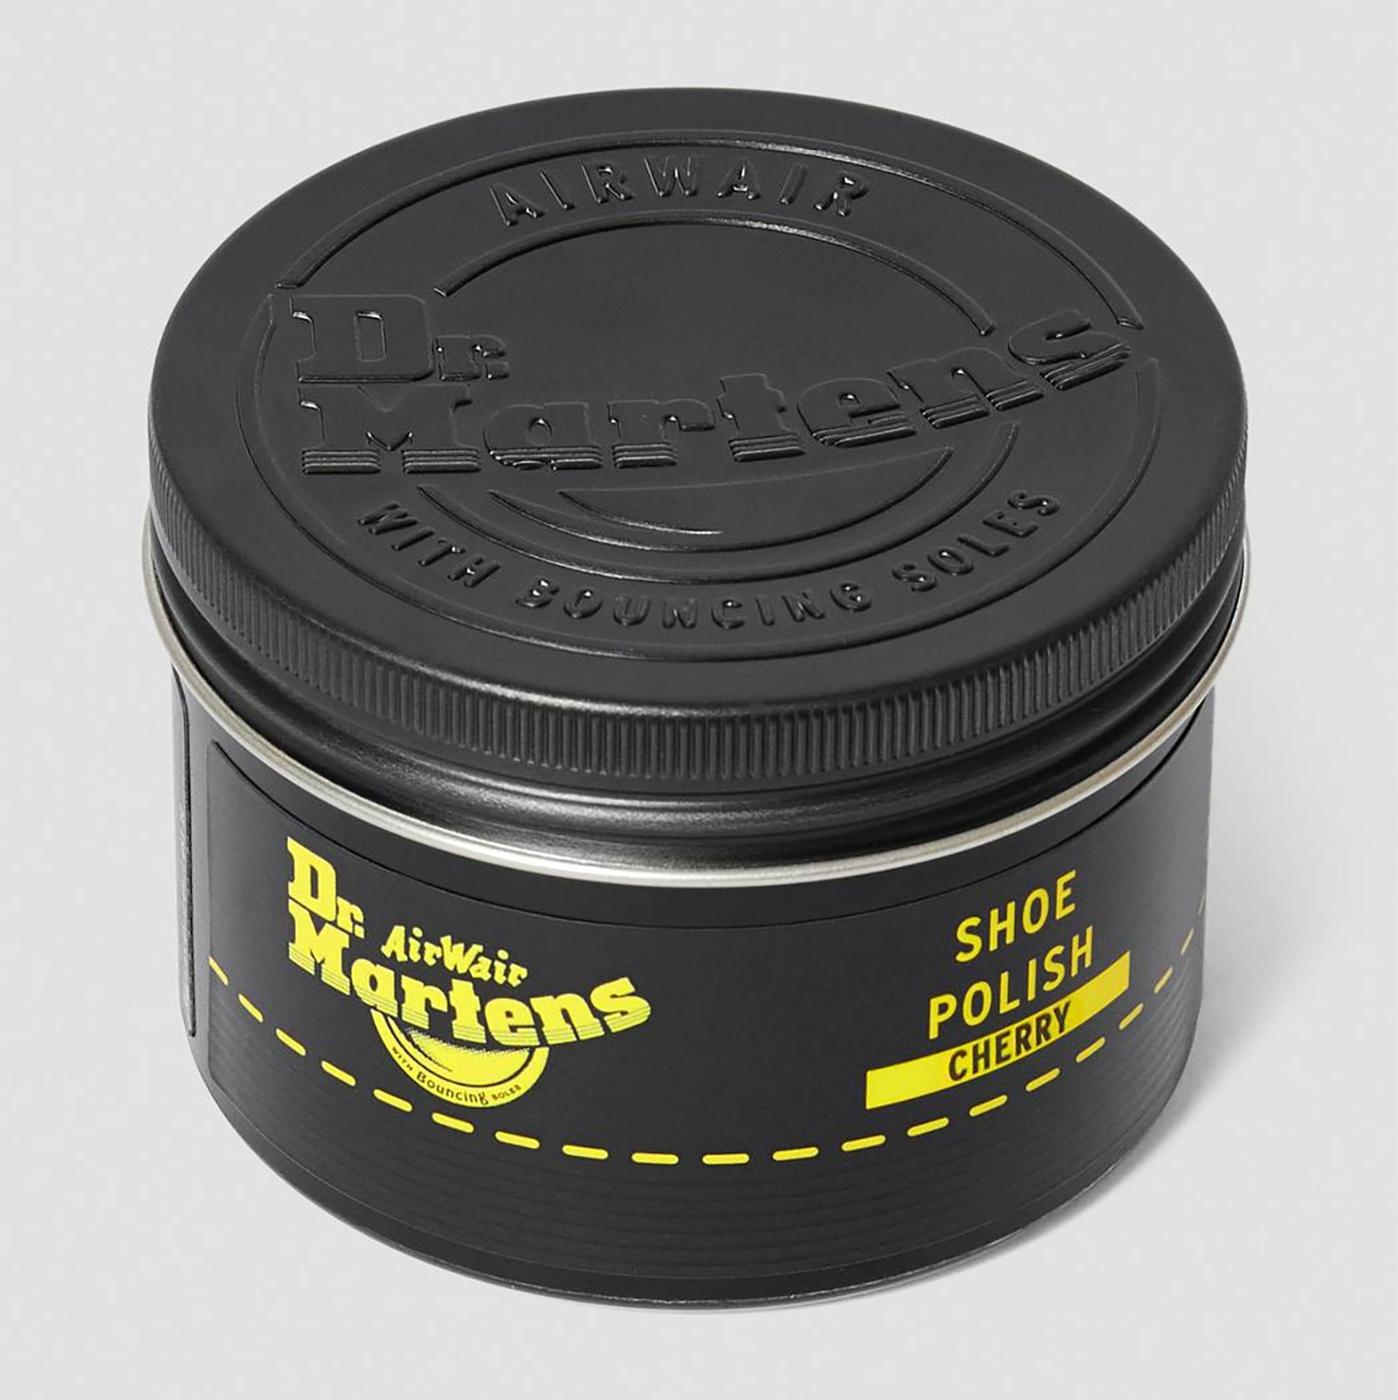 DR Martens 100ml Shoe Care Polish (Cherry Red)